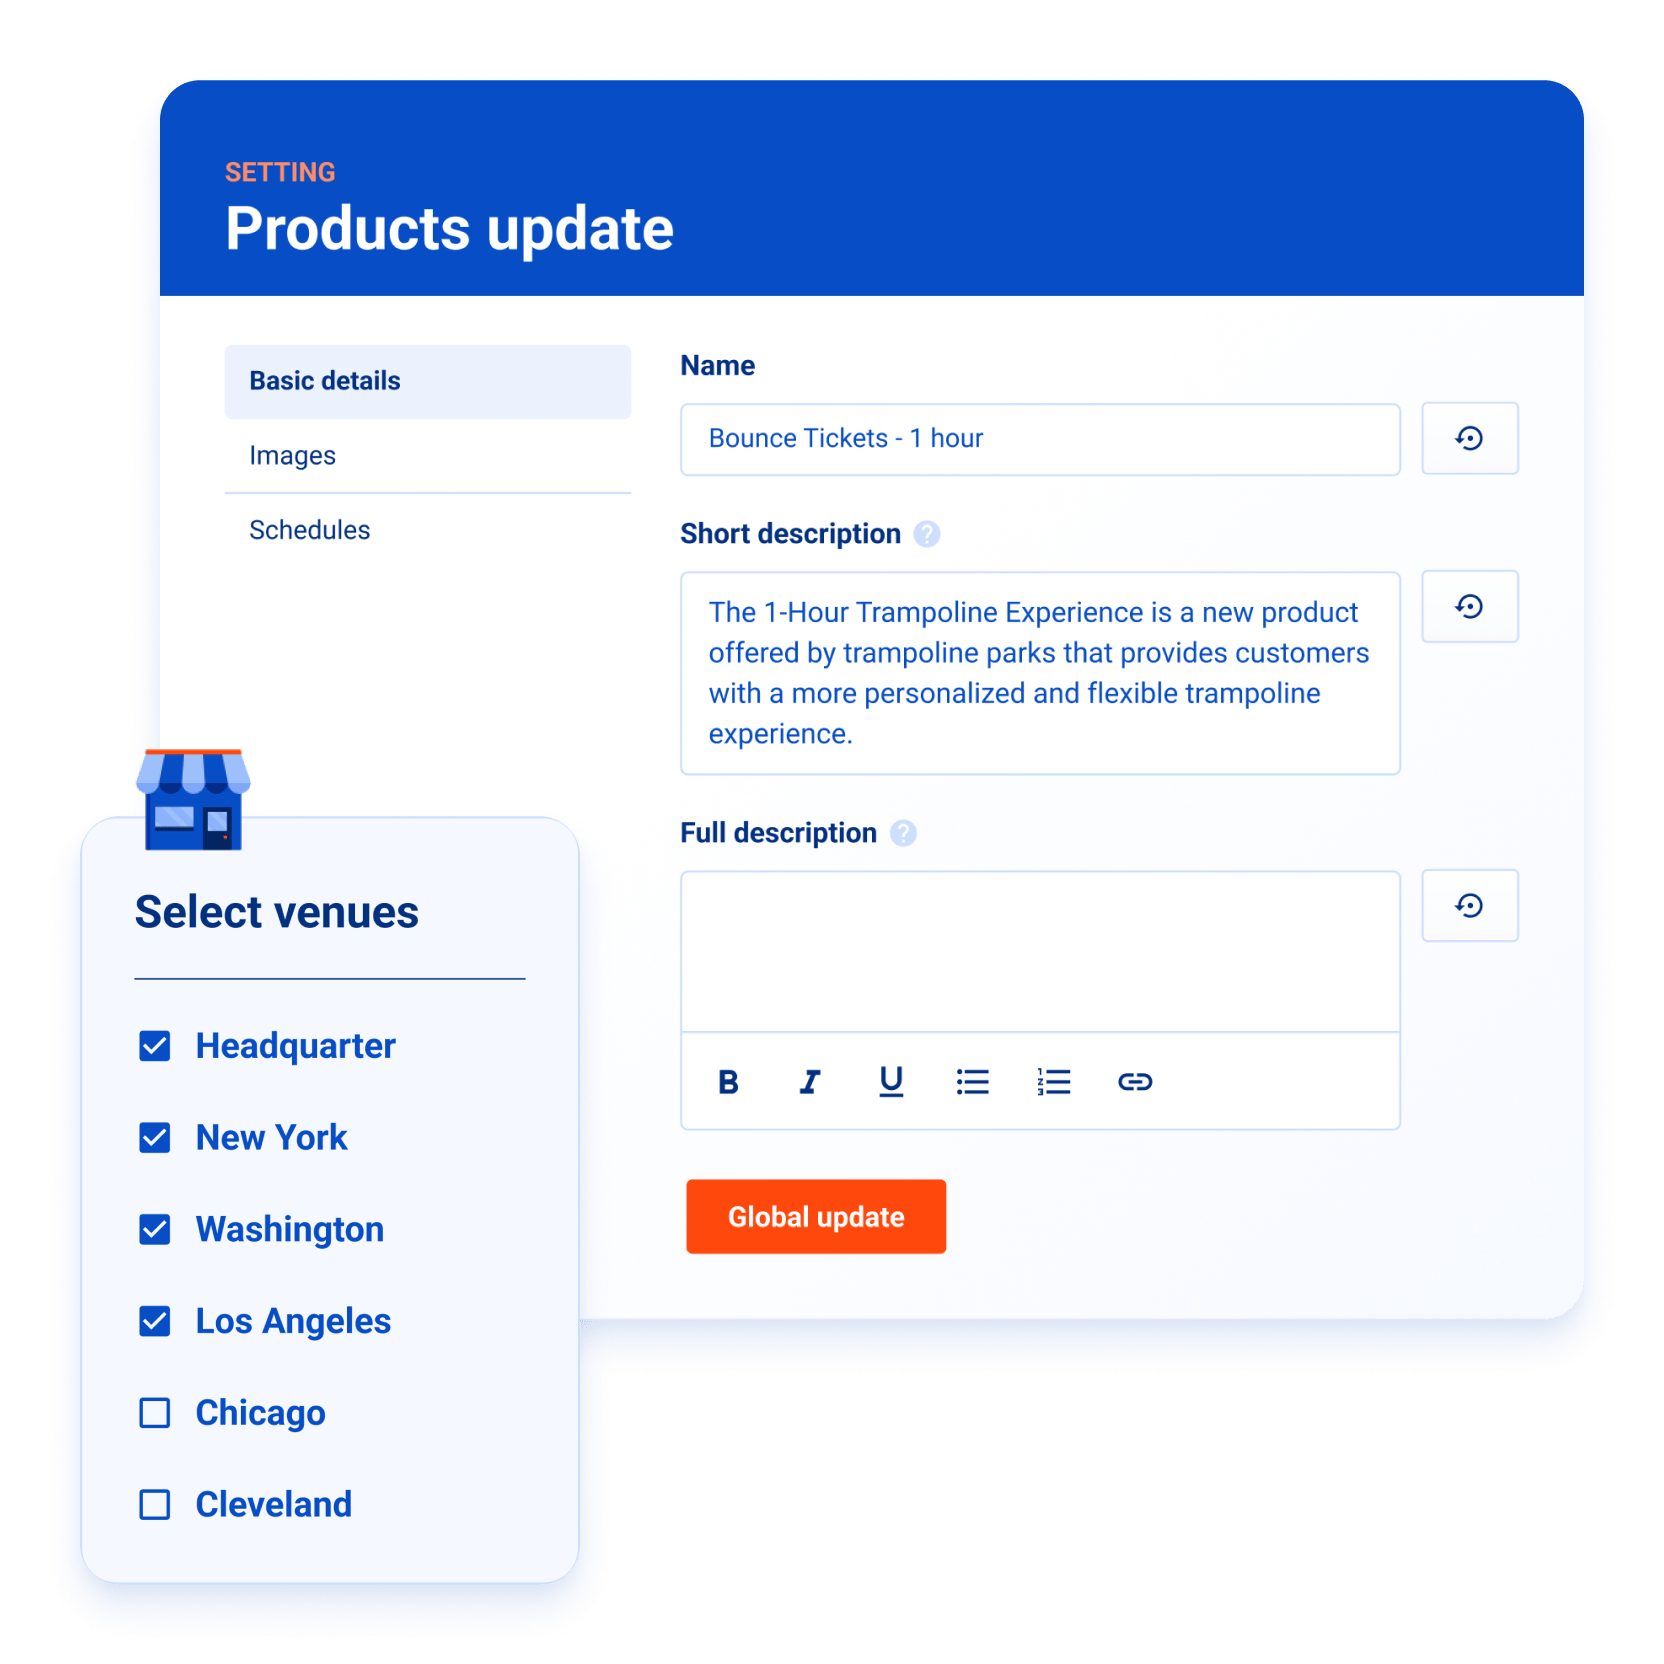 Product updates in HQ